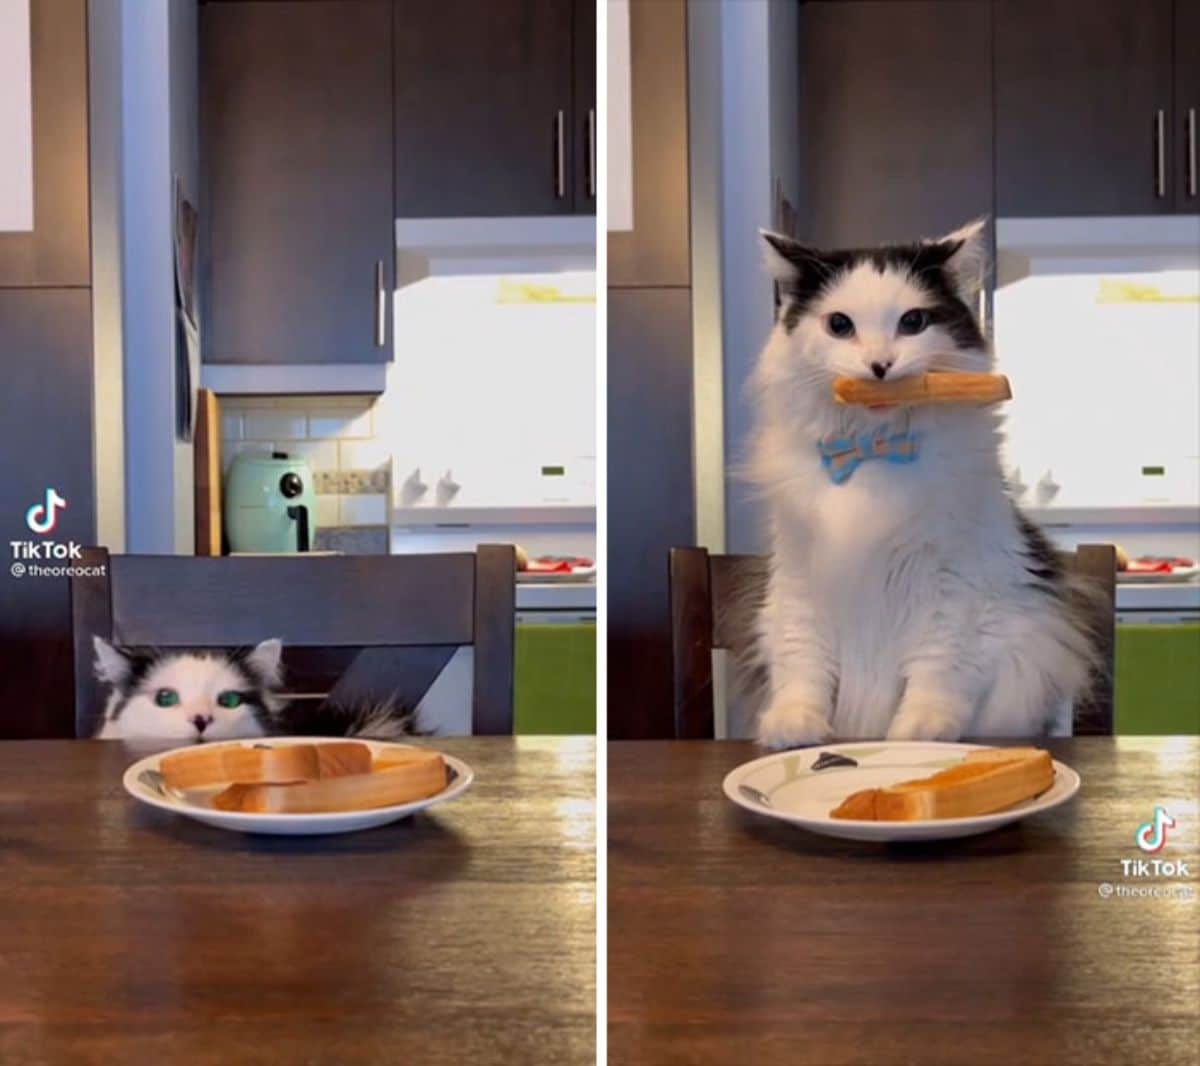 1 photo of black and white cat on a chair looking at some toast and 1 photo of the cat on the table and holding the toast